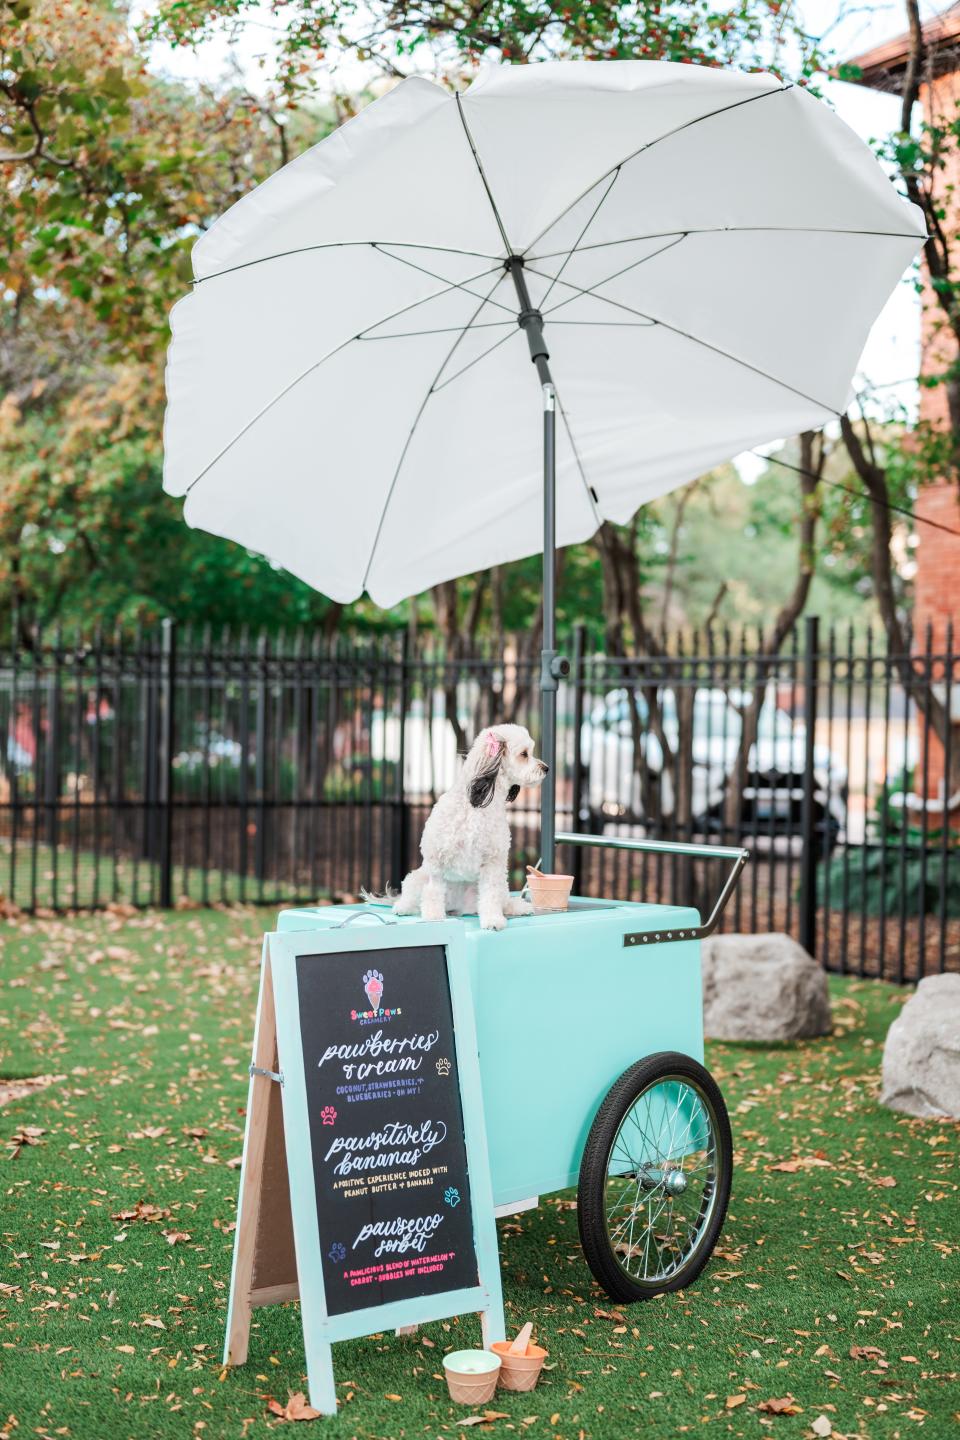 Promotional picture for Sweet Paws Creamery featuring a dog seated on an ice cream cart. The company will be launching pop-ups for their dog-friendly ice cream in Detroit April 20 and 21.